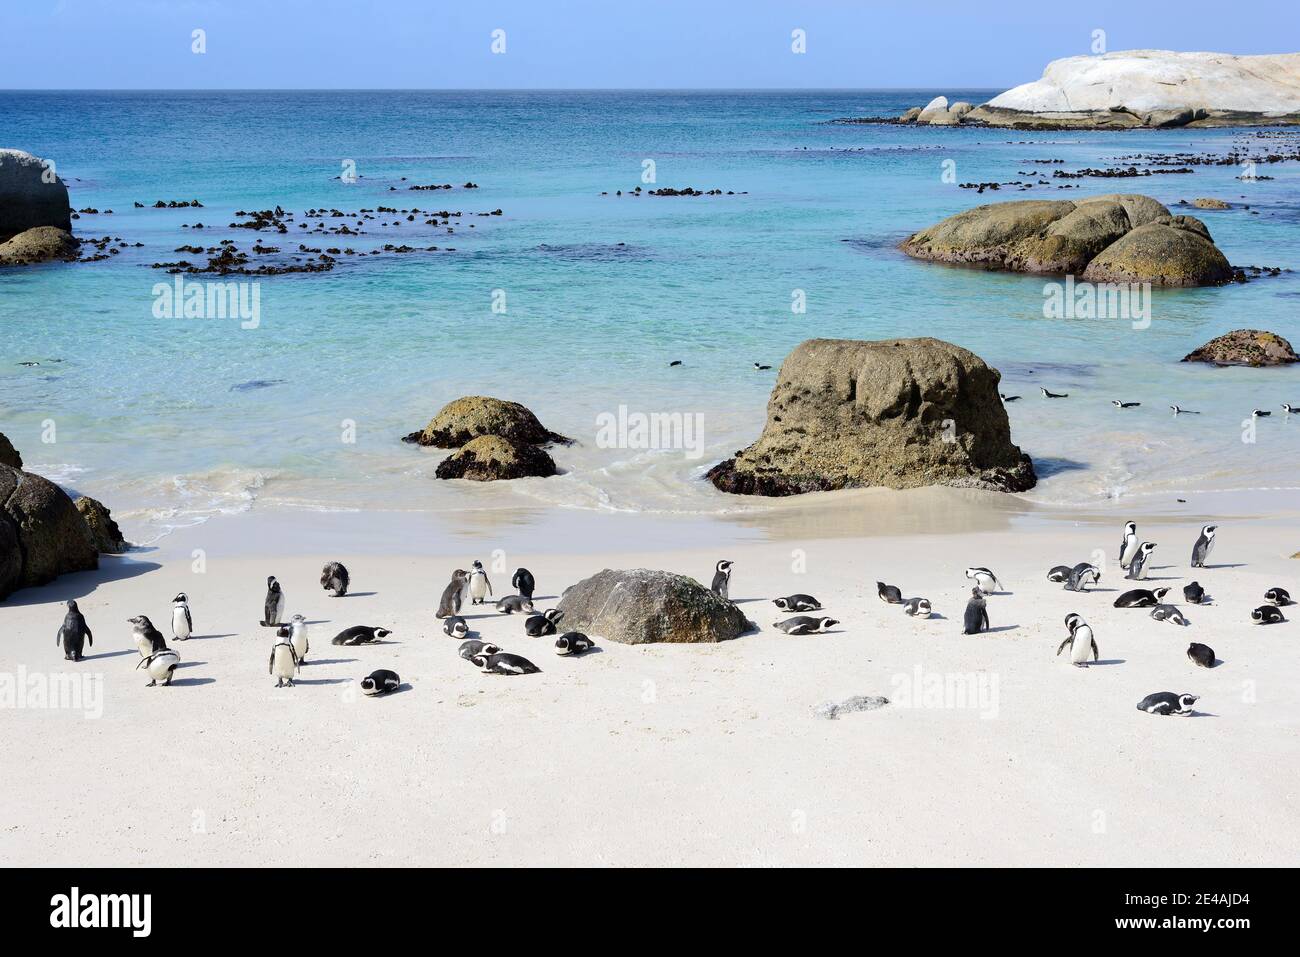 Colony of African penguins (Spheniscus demersus) on the beach, Boulders Beach or Boulders Bay, Simons Town, South Africa, Indian Ocean Stock Photo